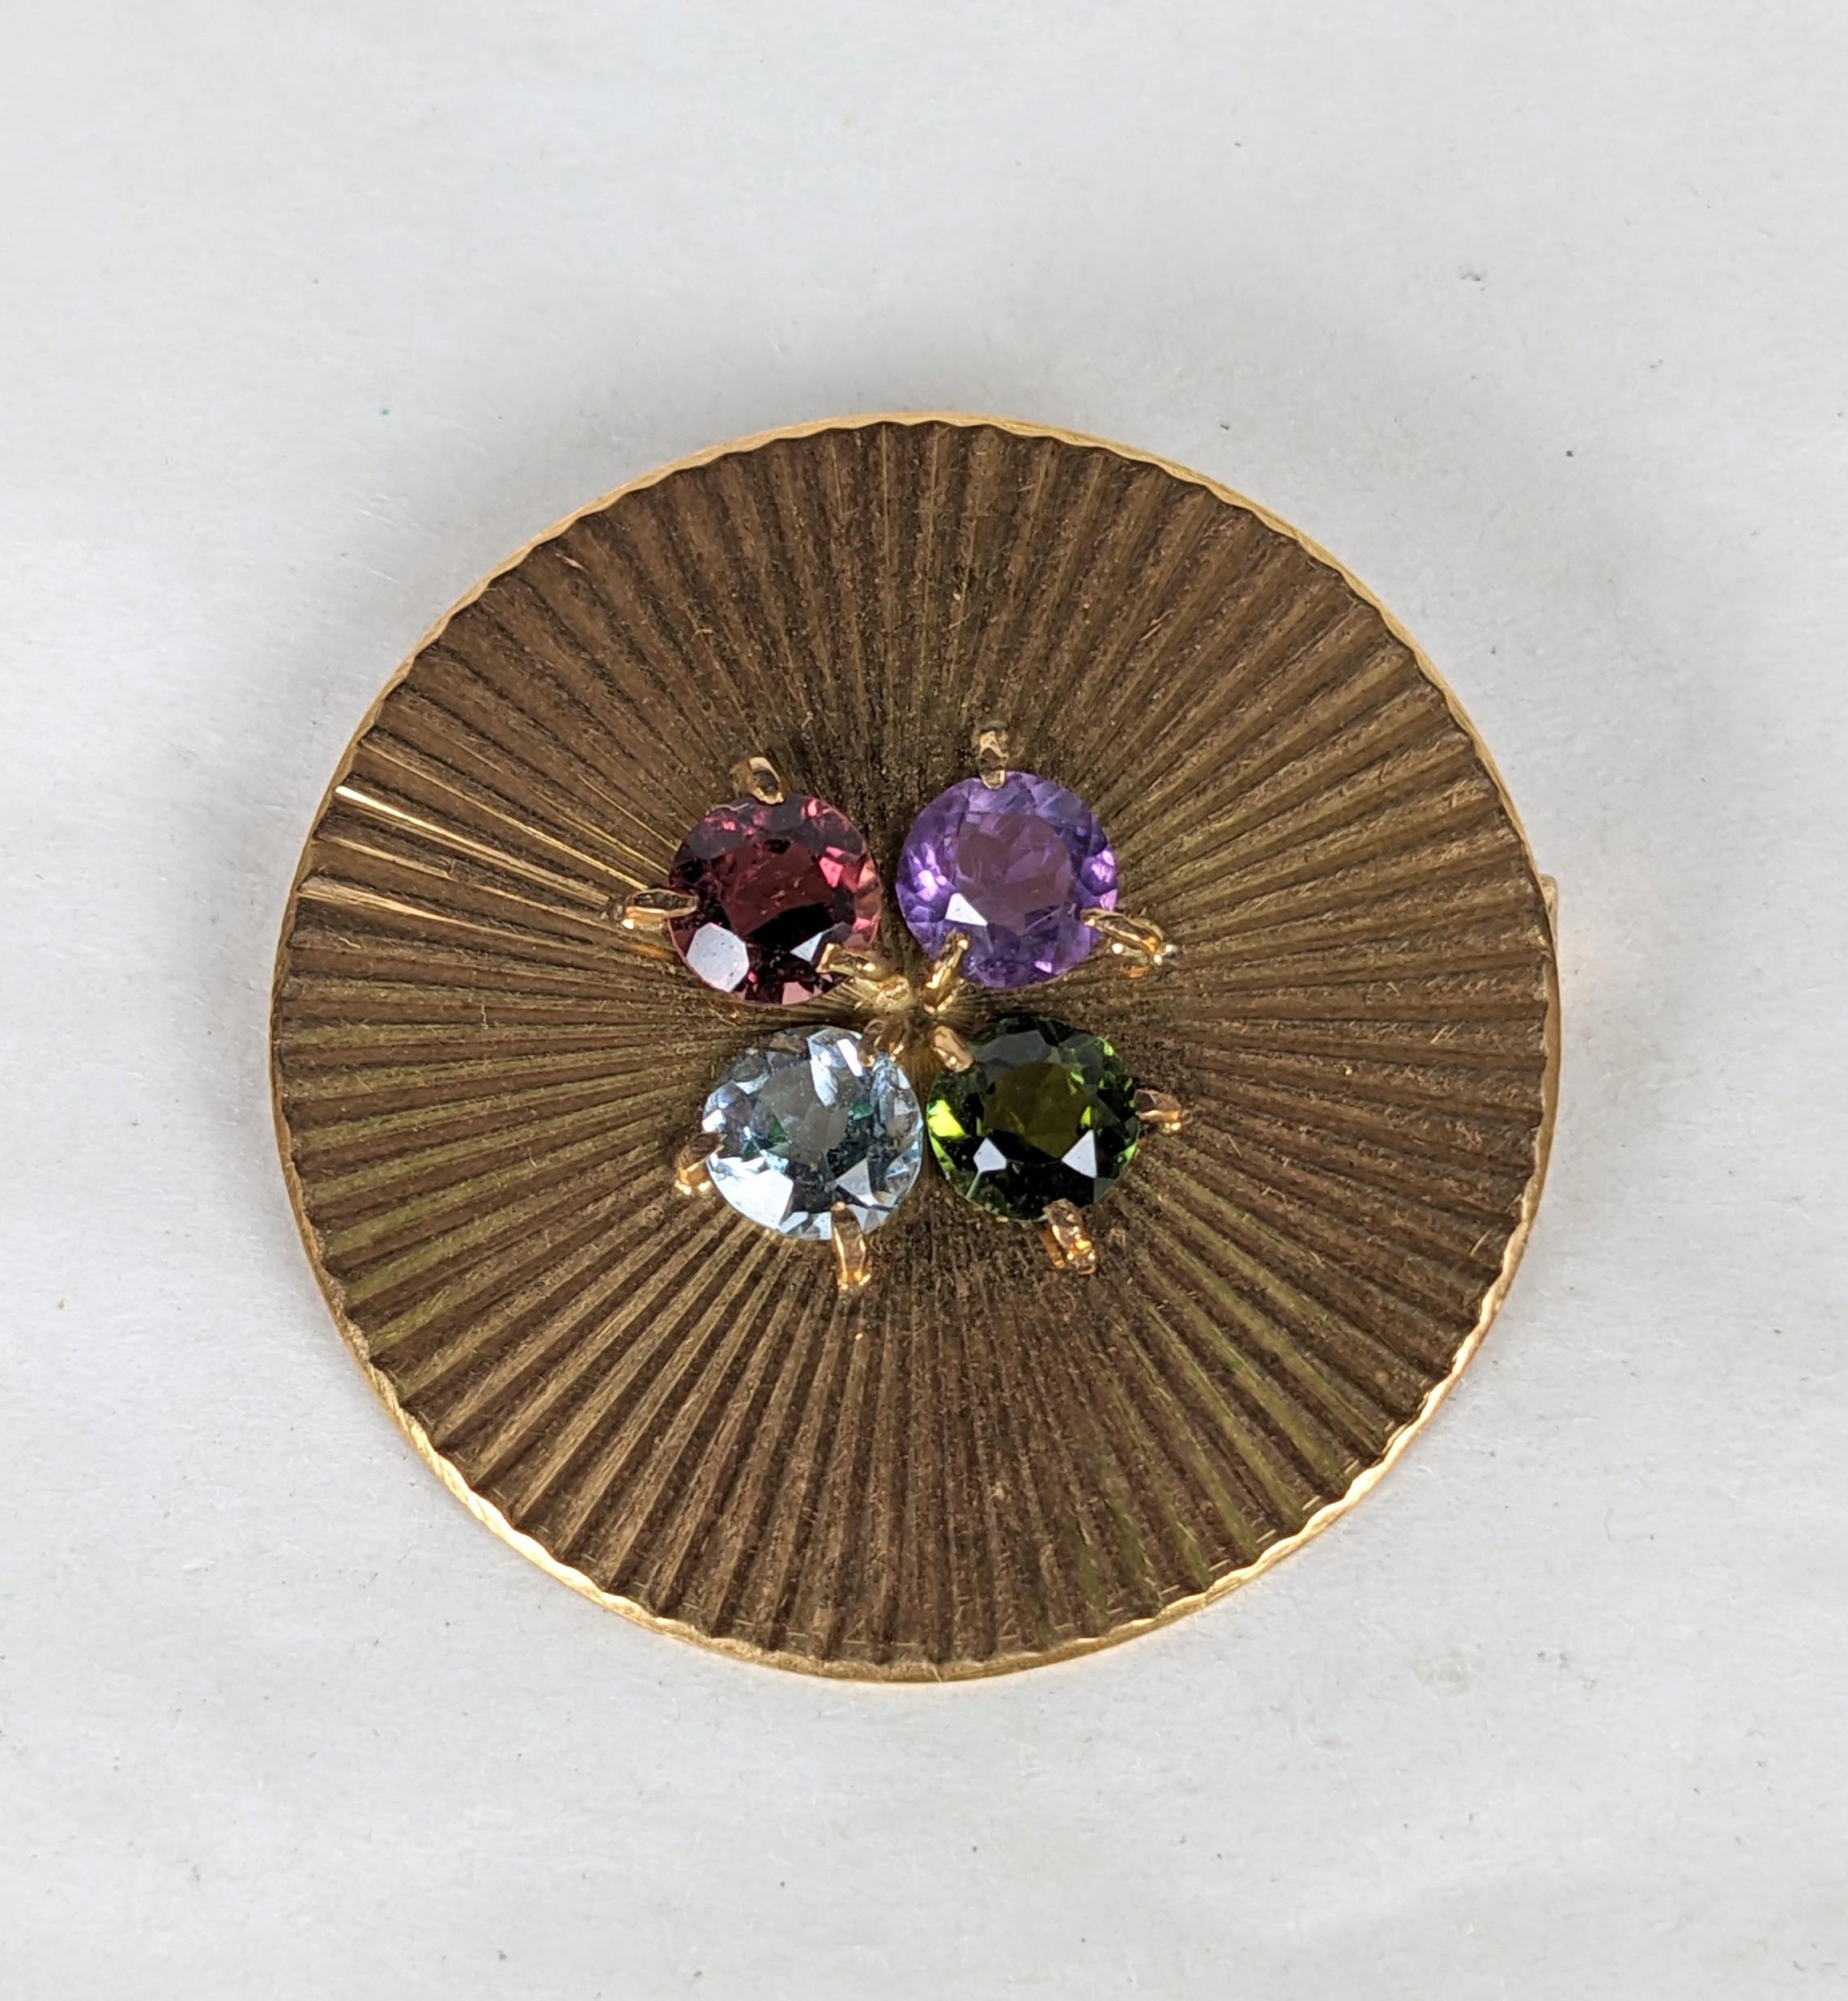 Elegant French Ribbed Gold Circle Brooch from the 1950's set with semiprecious stones such as amythest, garnet, tourmaline and blue zircon. 1.25